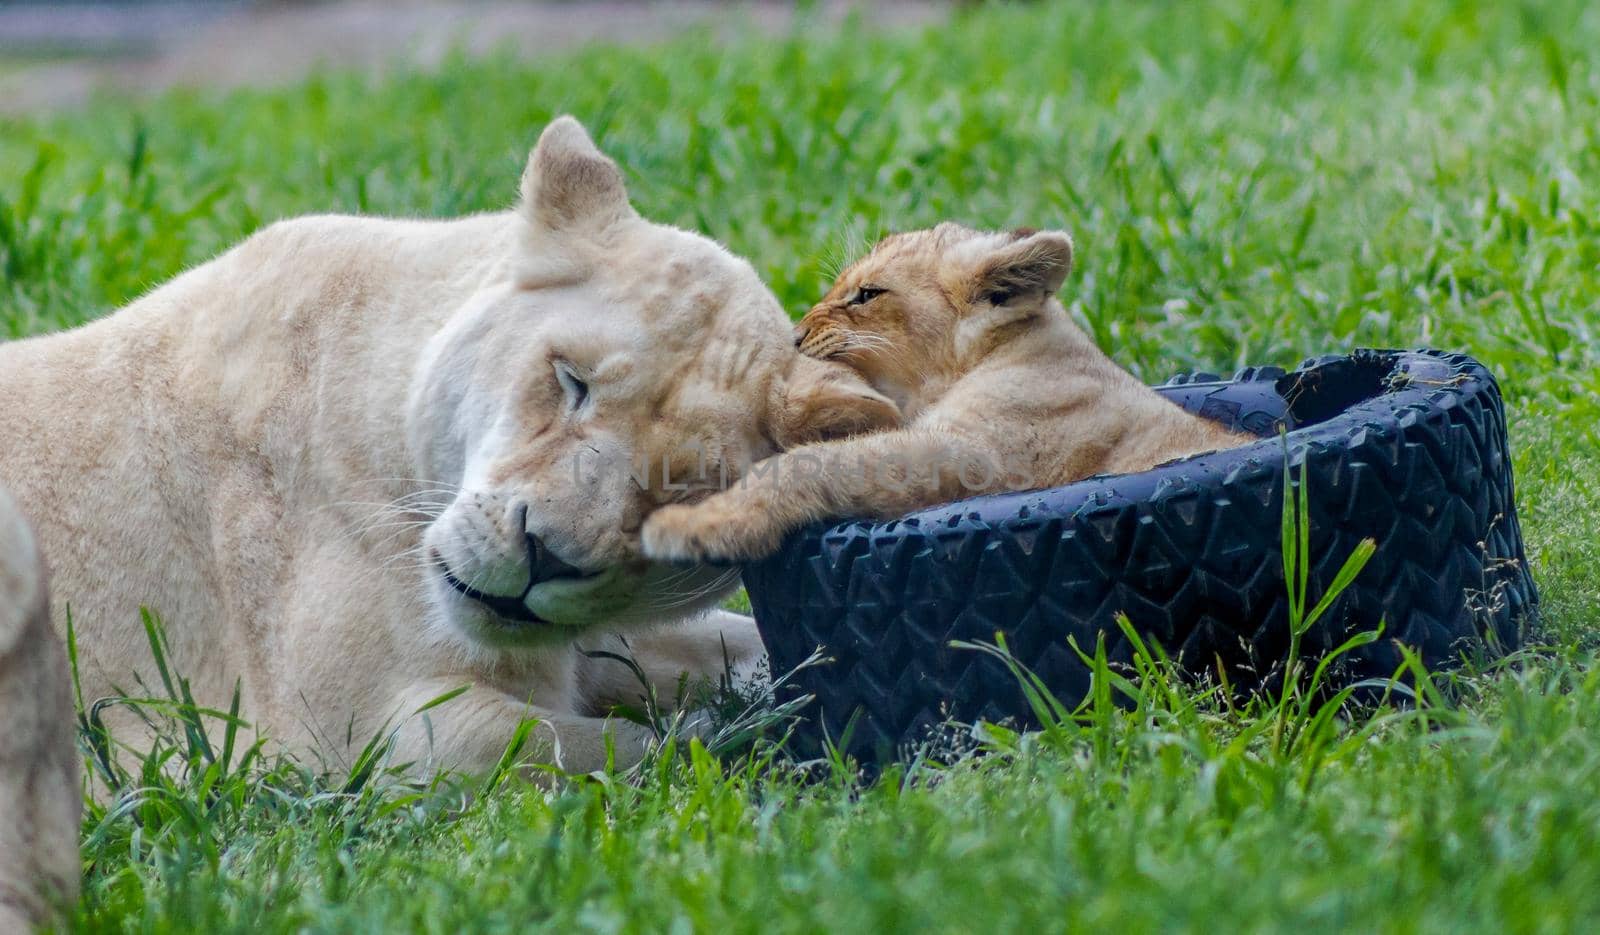 Lion mother and cub playing togehter in a zoo, nsw, australia